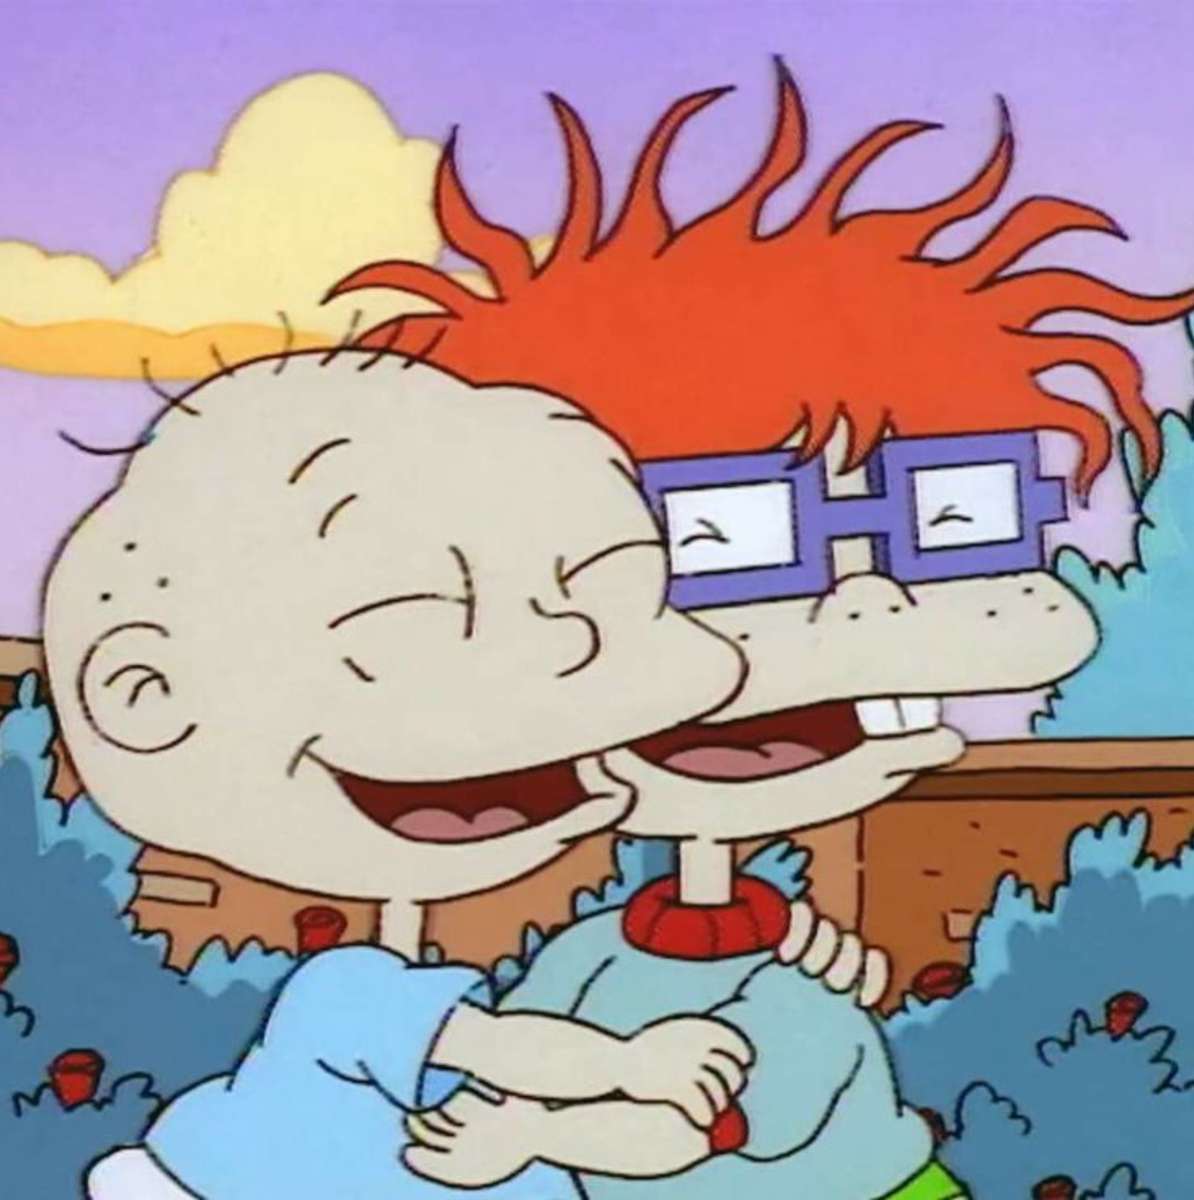 Tommy e Chuckie! ❤️❤️❤️❤️❤️❤️ puzzle online